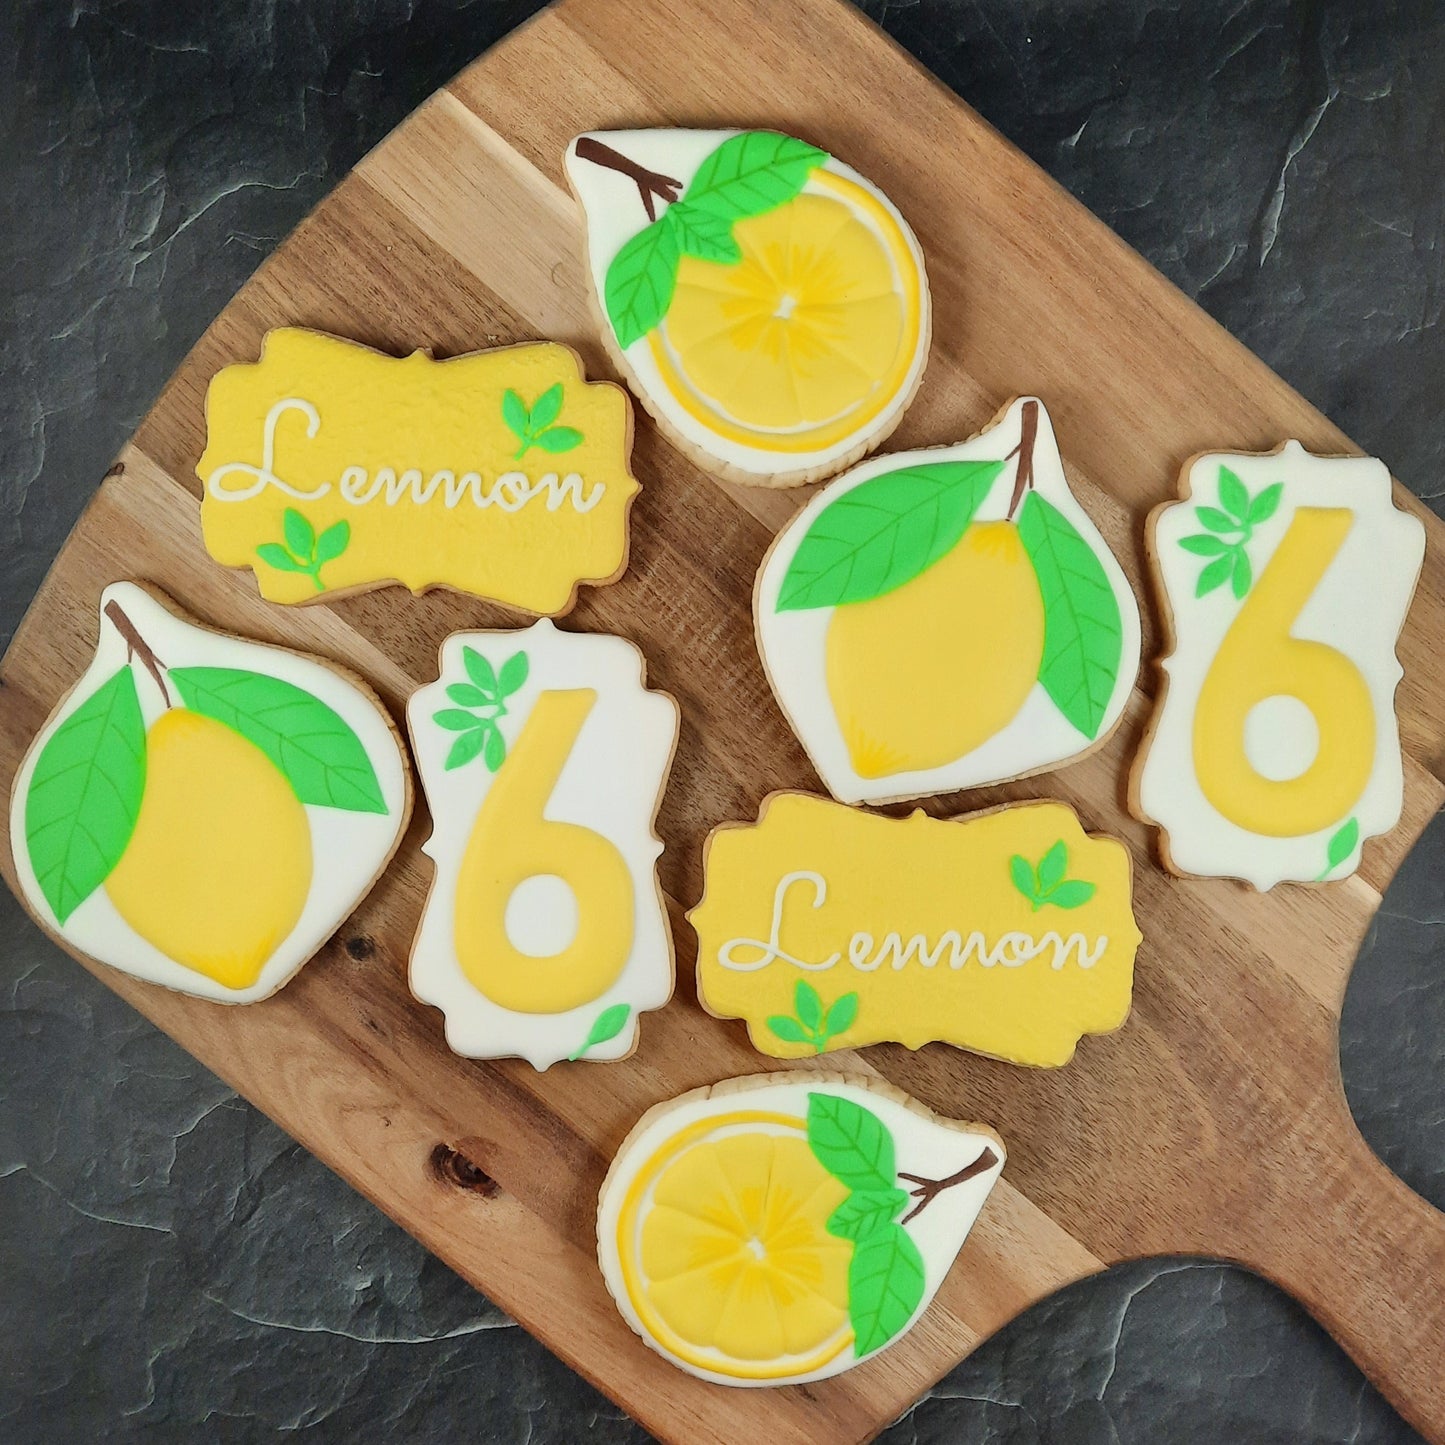 Lemon Themed Cookies for a 6th Birthday